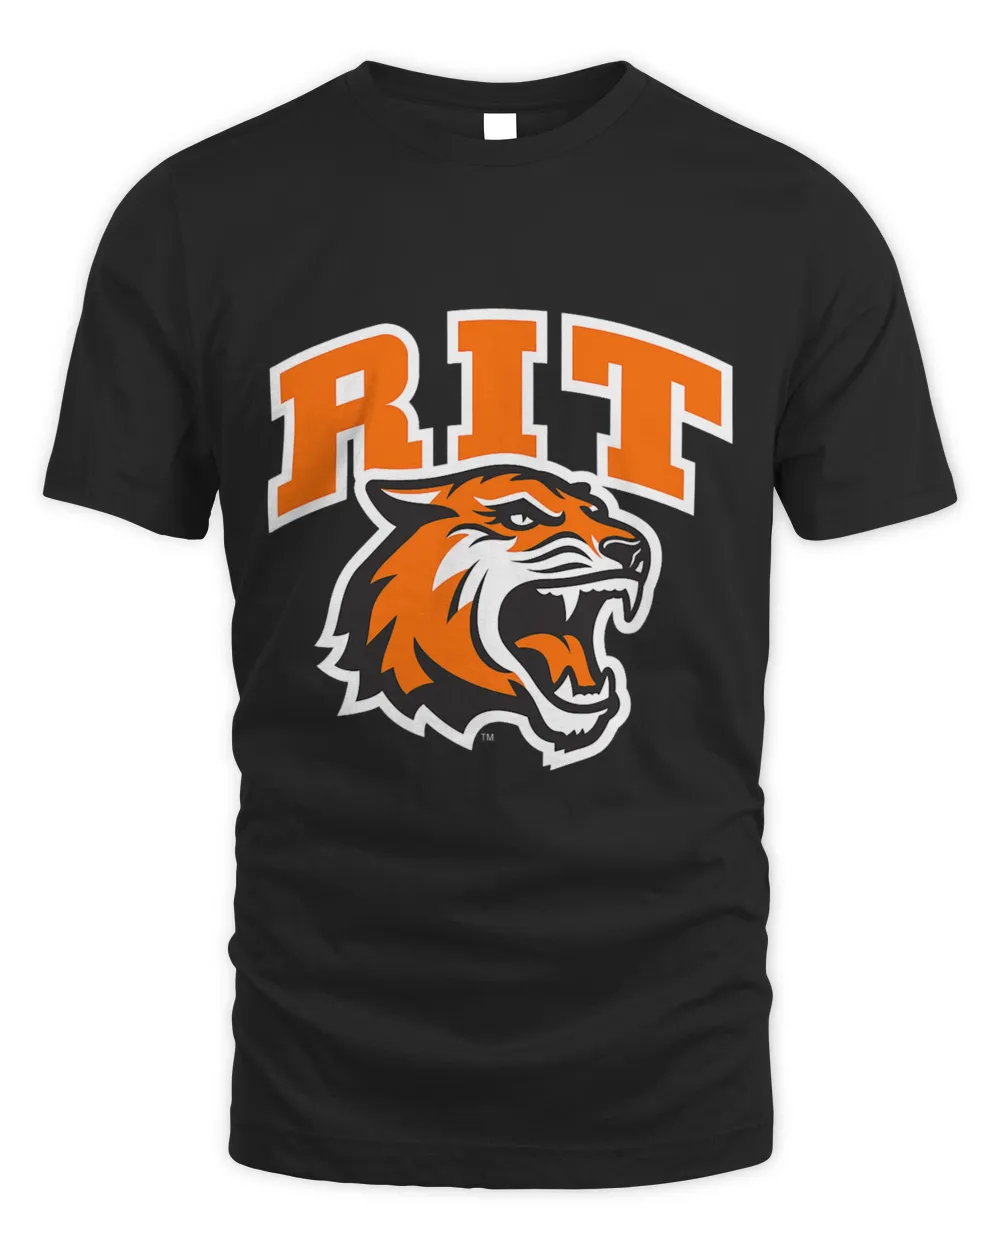 Rochester Institute of Technology RIT Tiger Stacked Logo 21